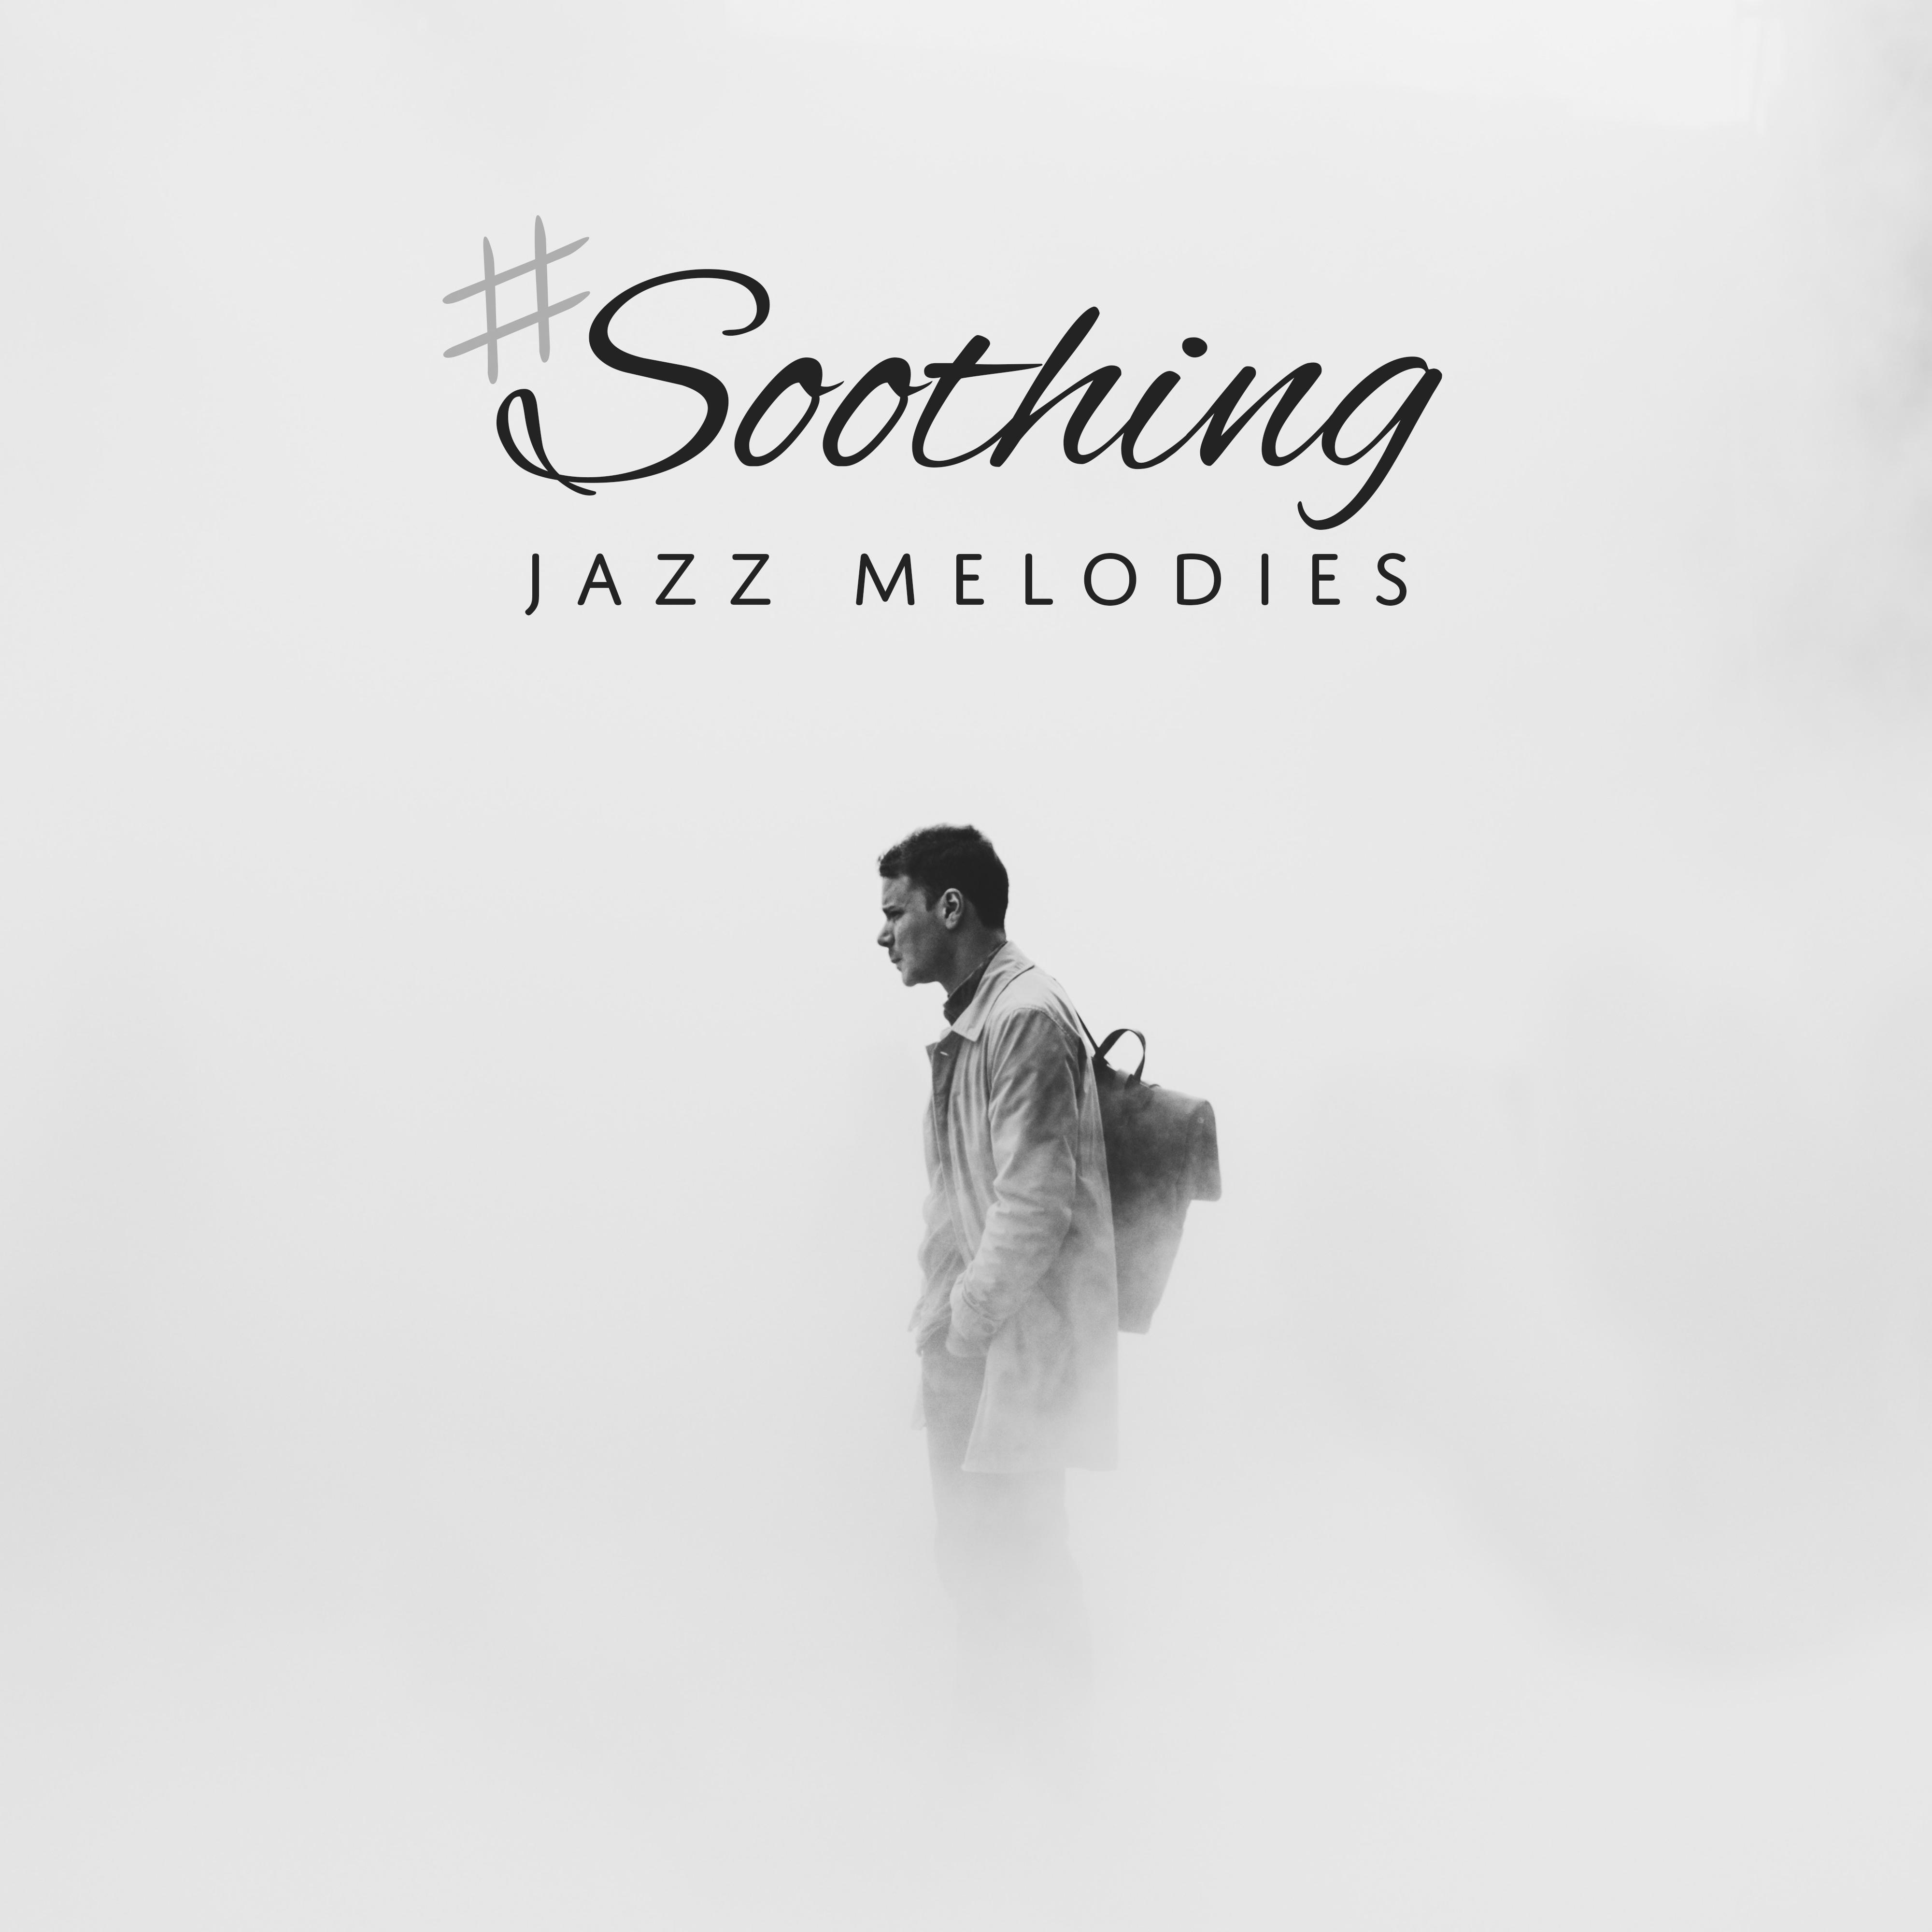 #Soothing Jazz Melodies